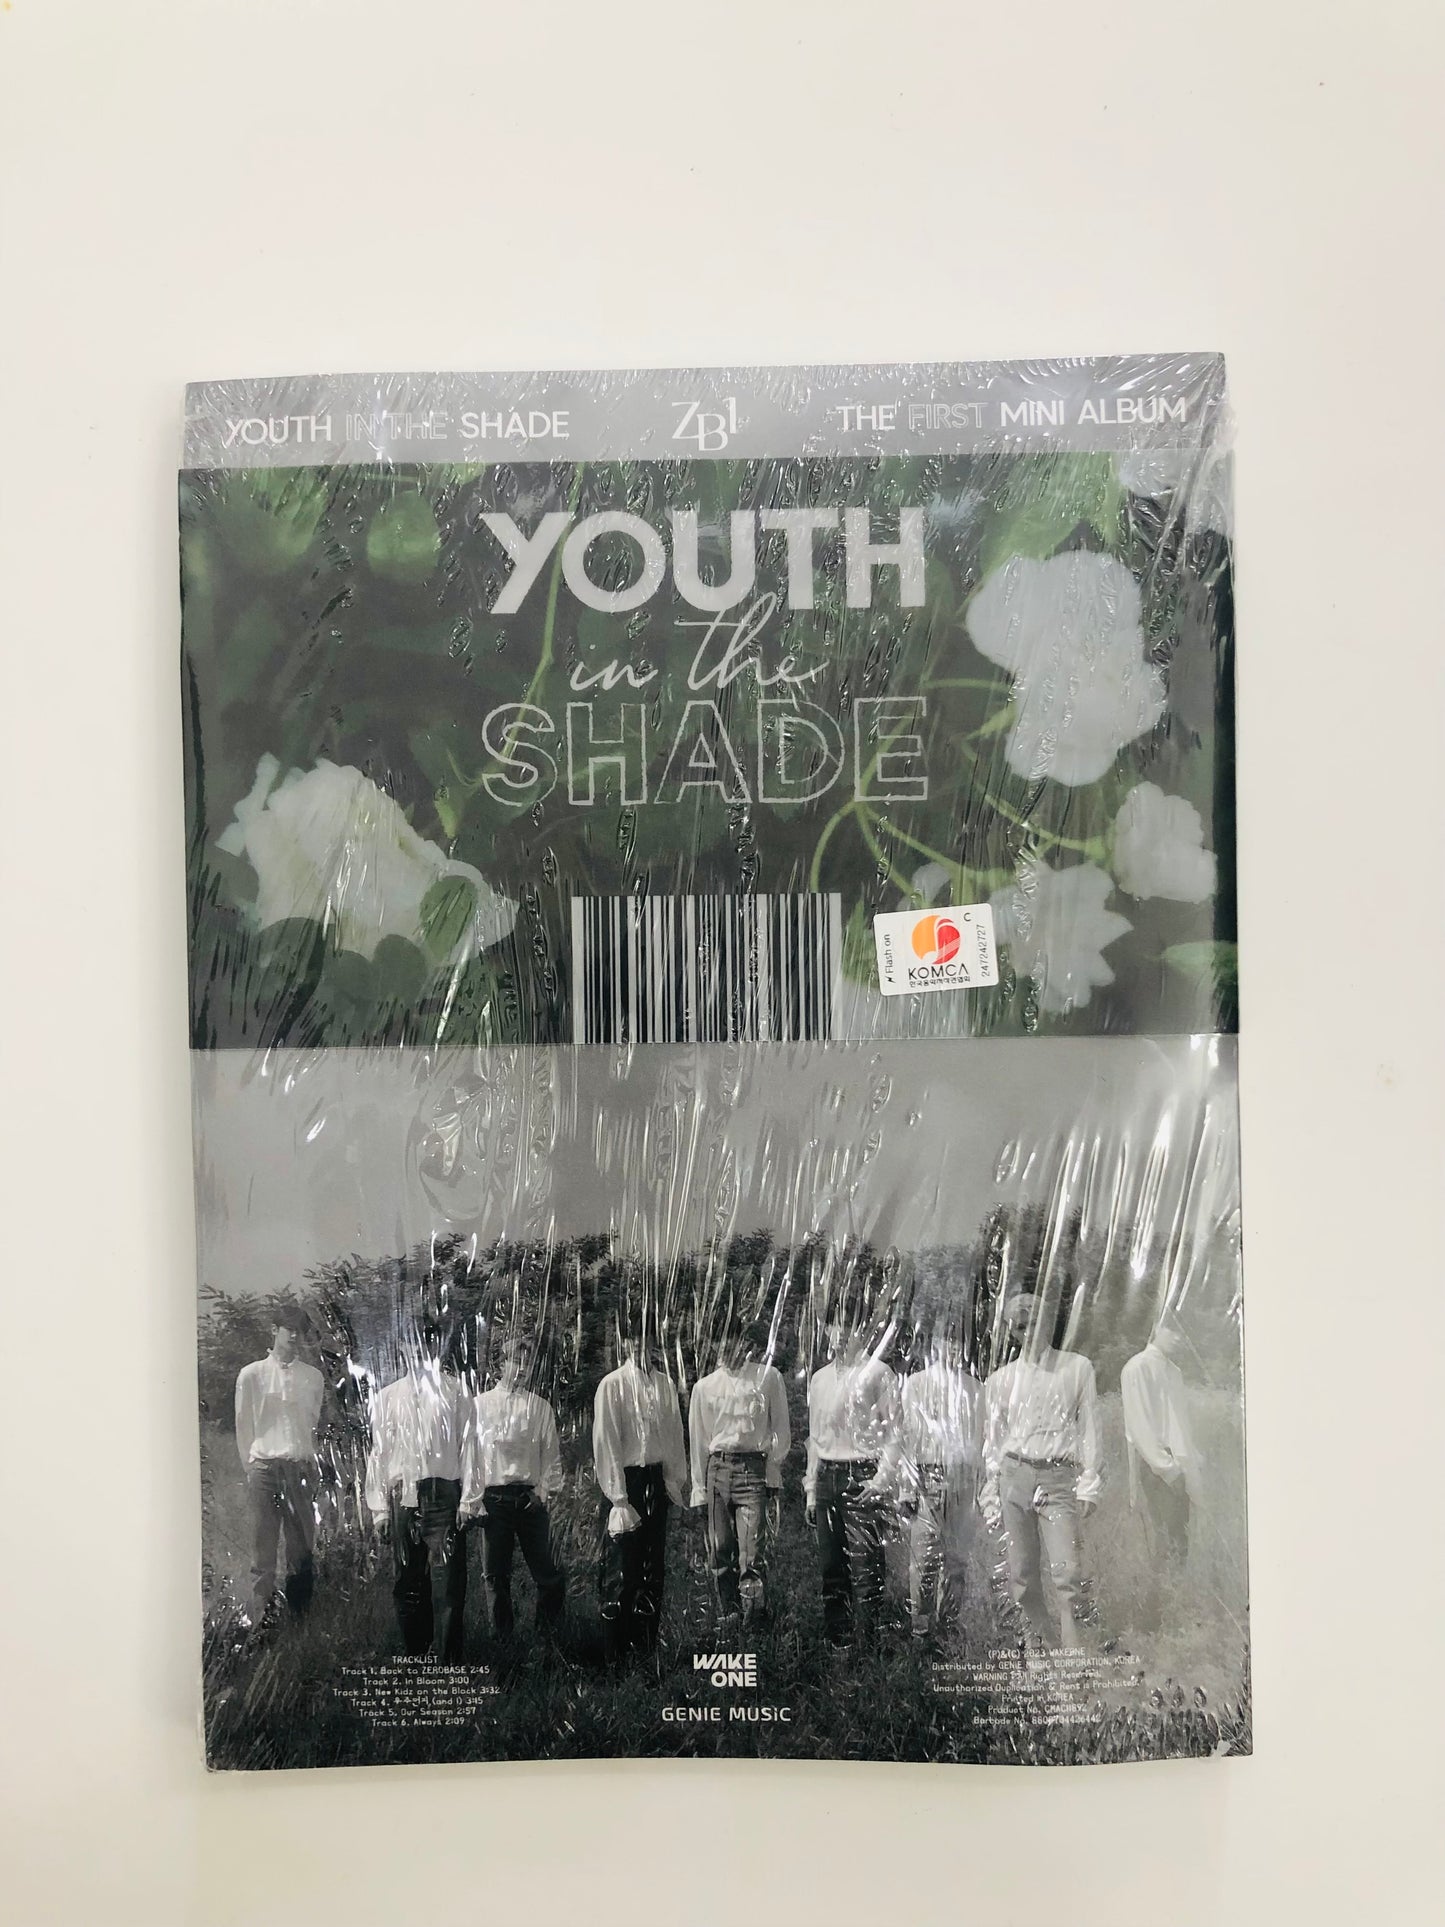 ZB1 Youth in the Shade Official Album